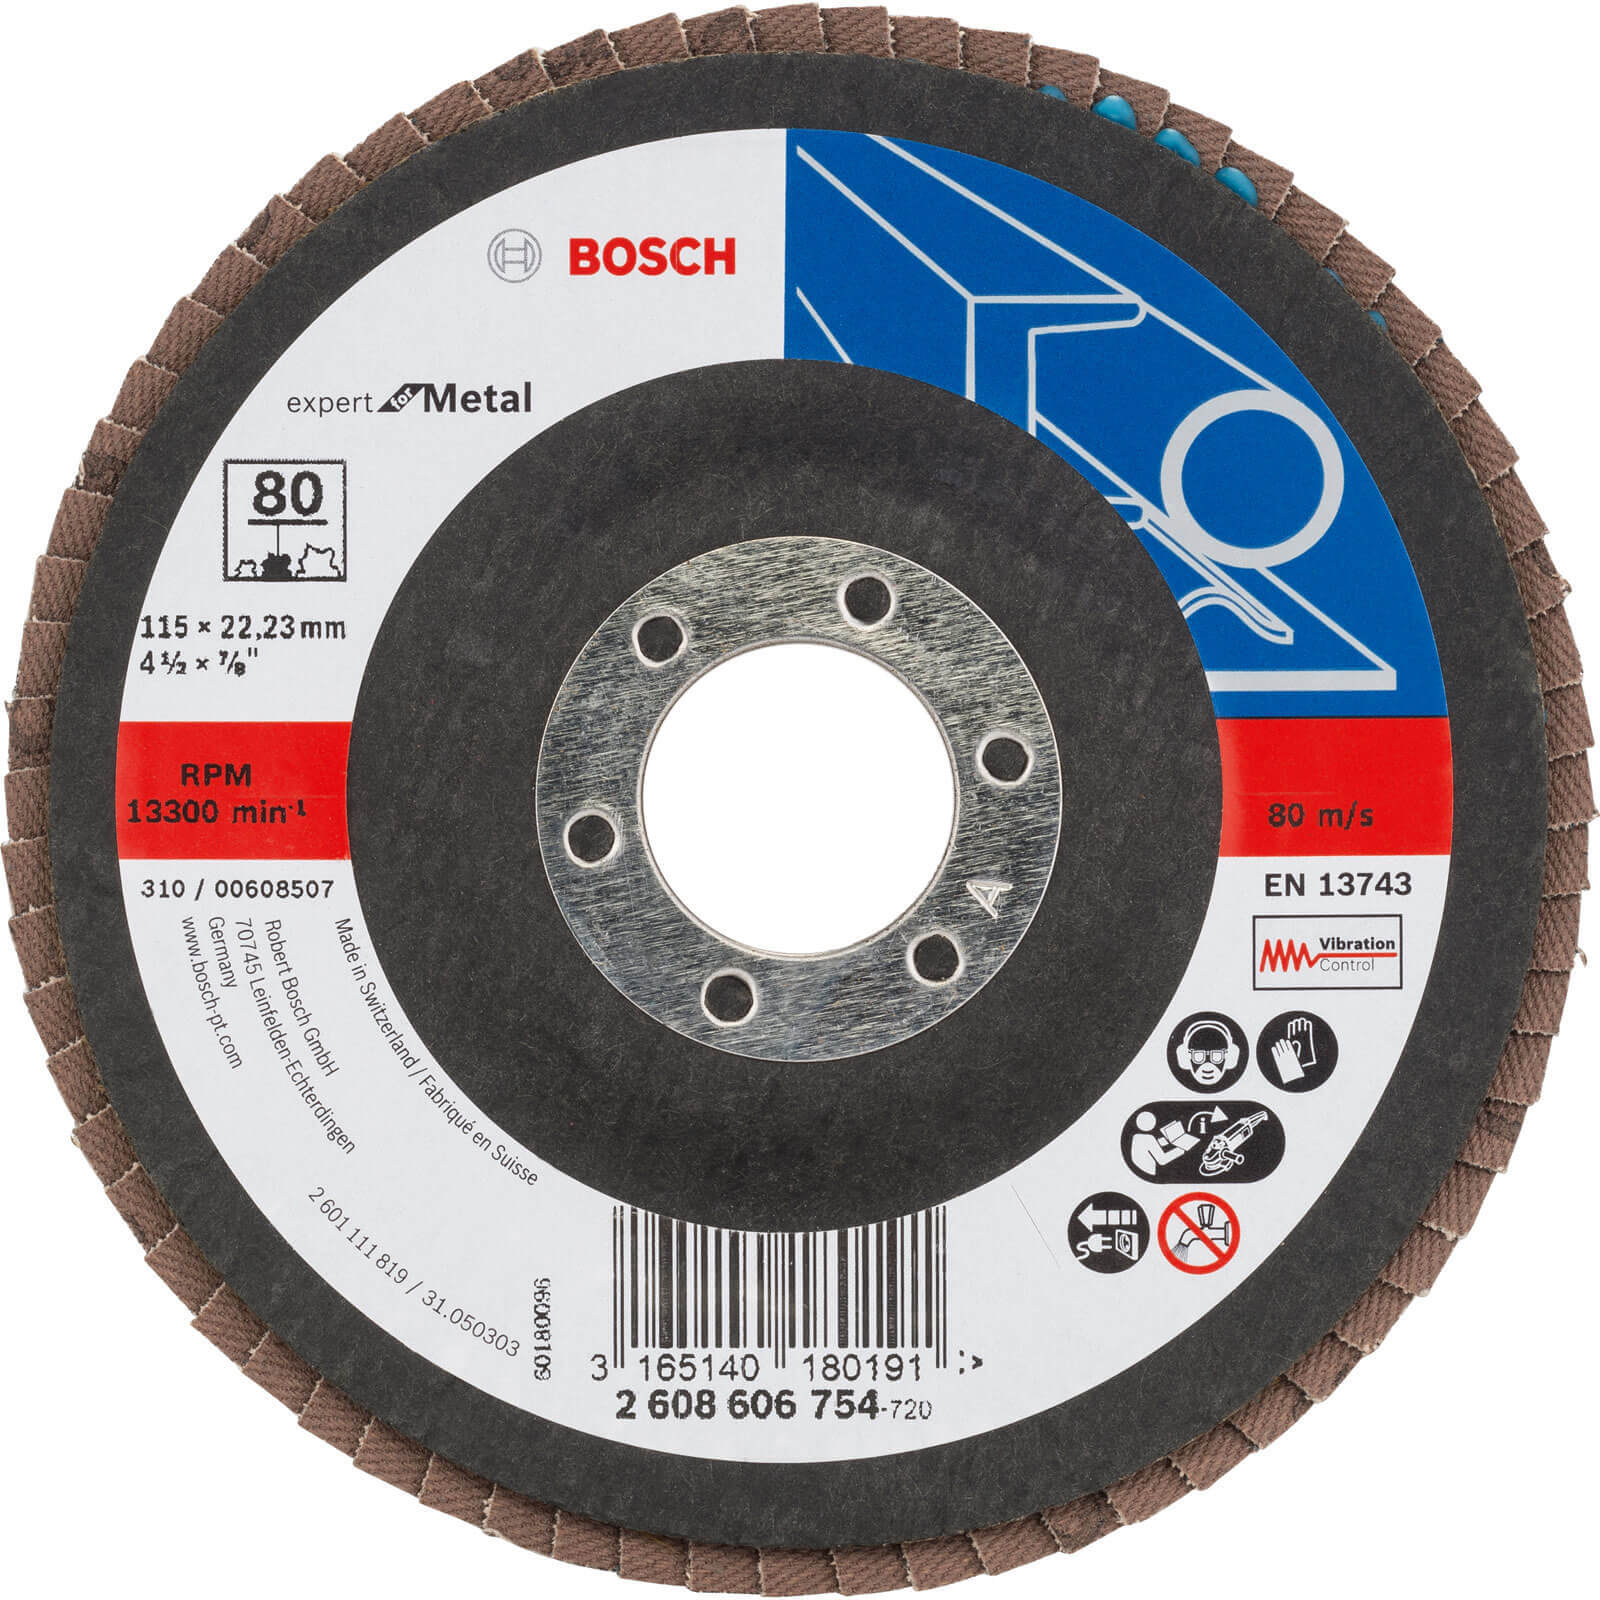 Photos - Cutting Disc Bosch Expert X551 for Metal Angled Flap Disc 115mm 80g Pack of 1 260860675 